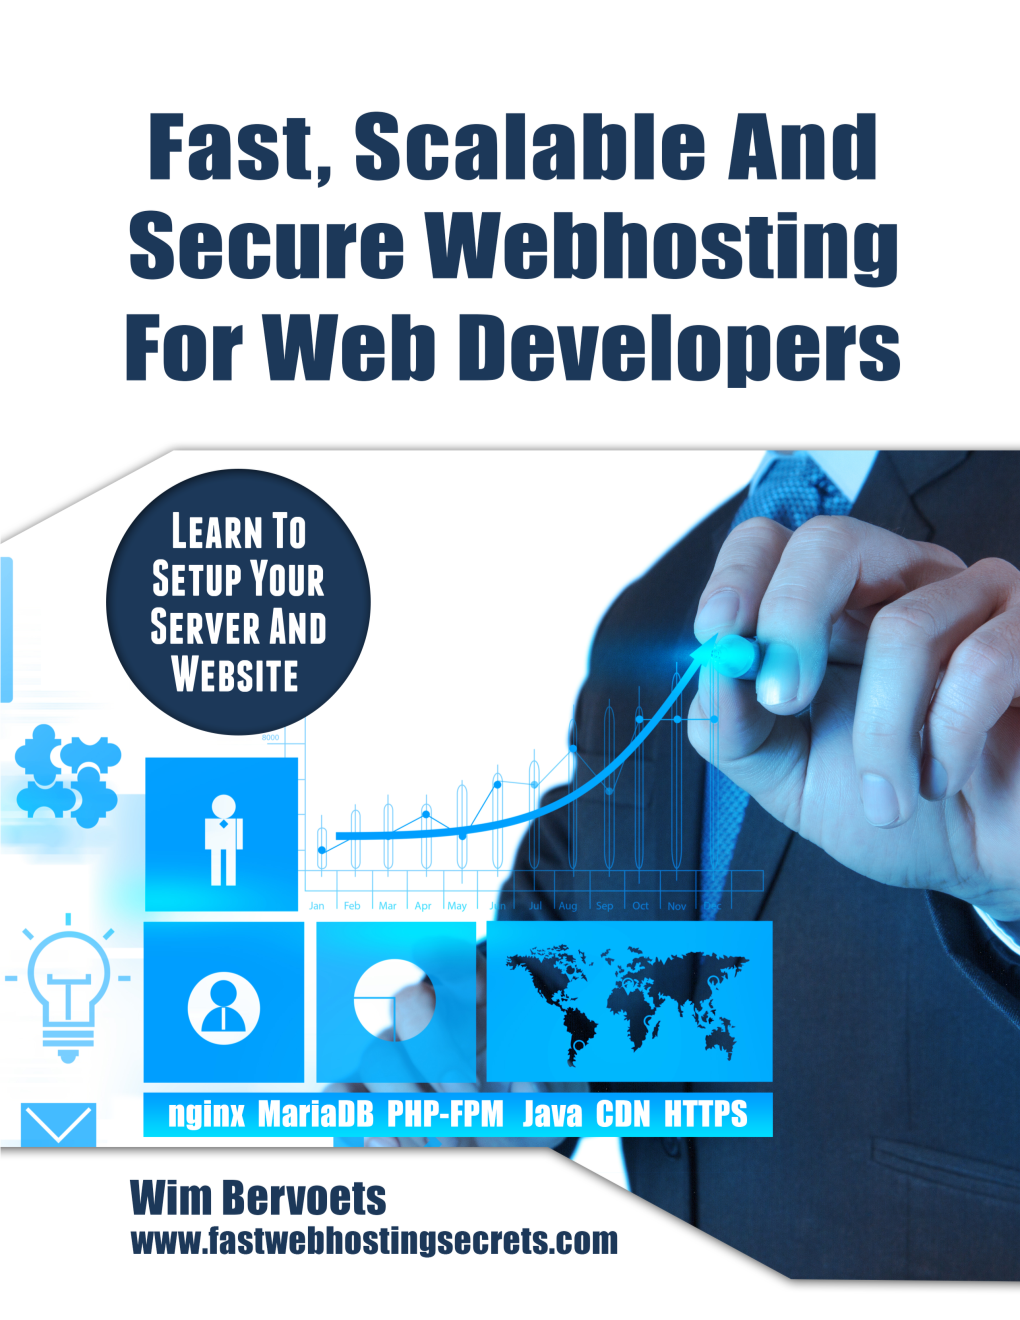 Fast, Scalable and Secure Web Hosting for Web Developers Learn to Set up Your Server and Website